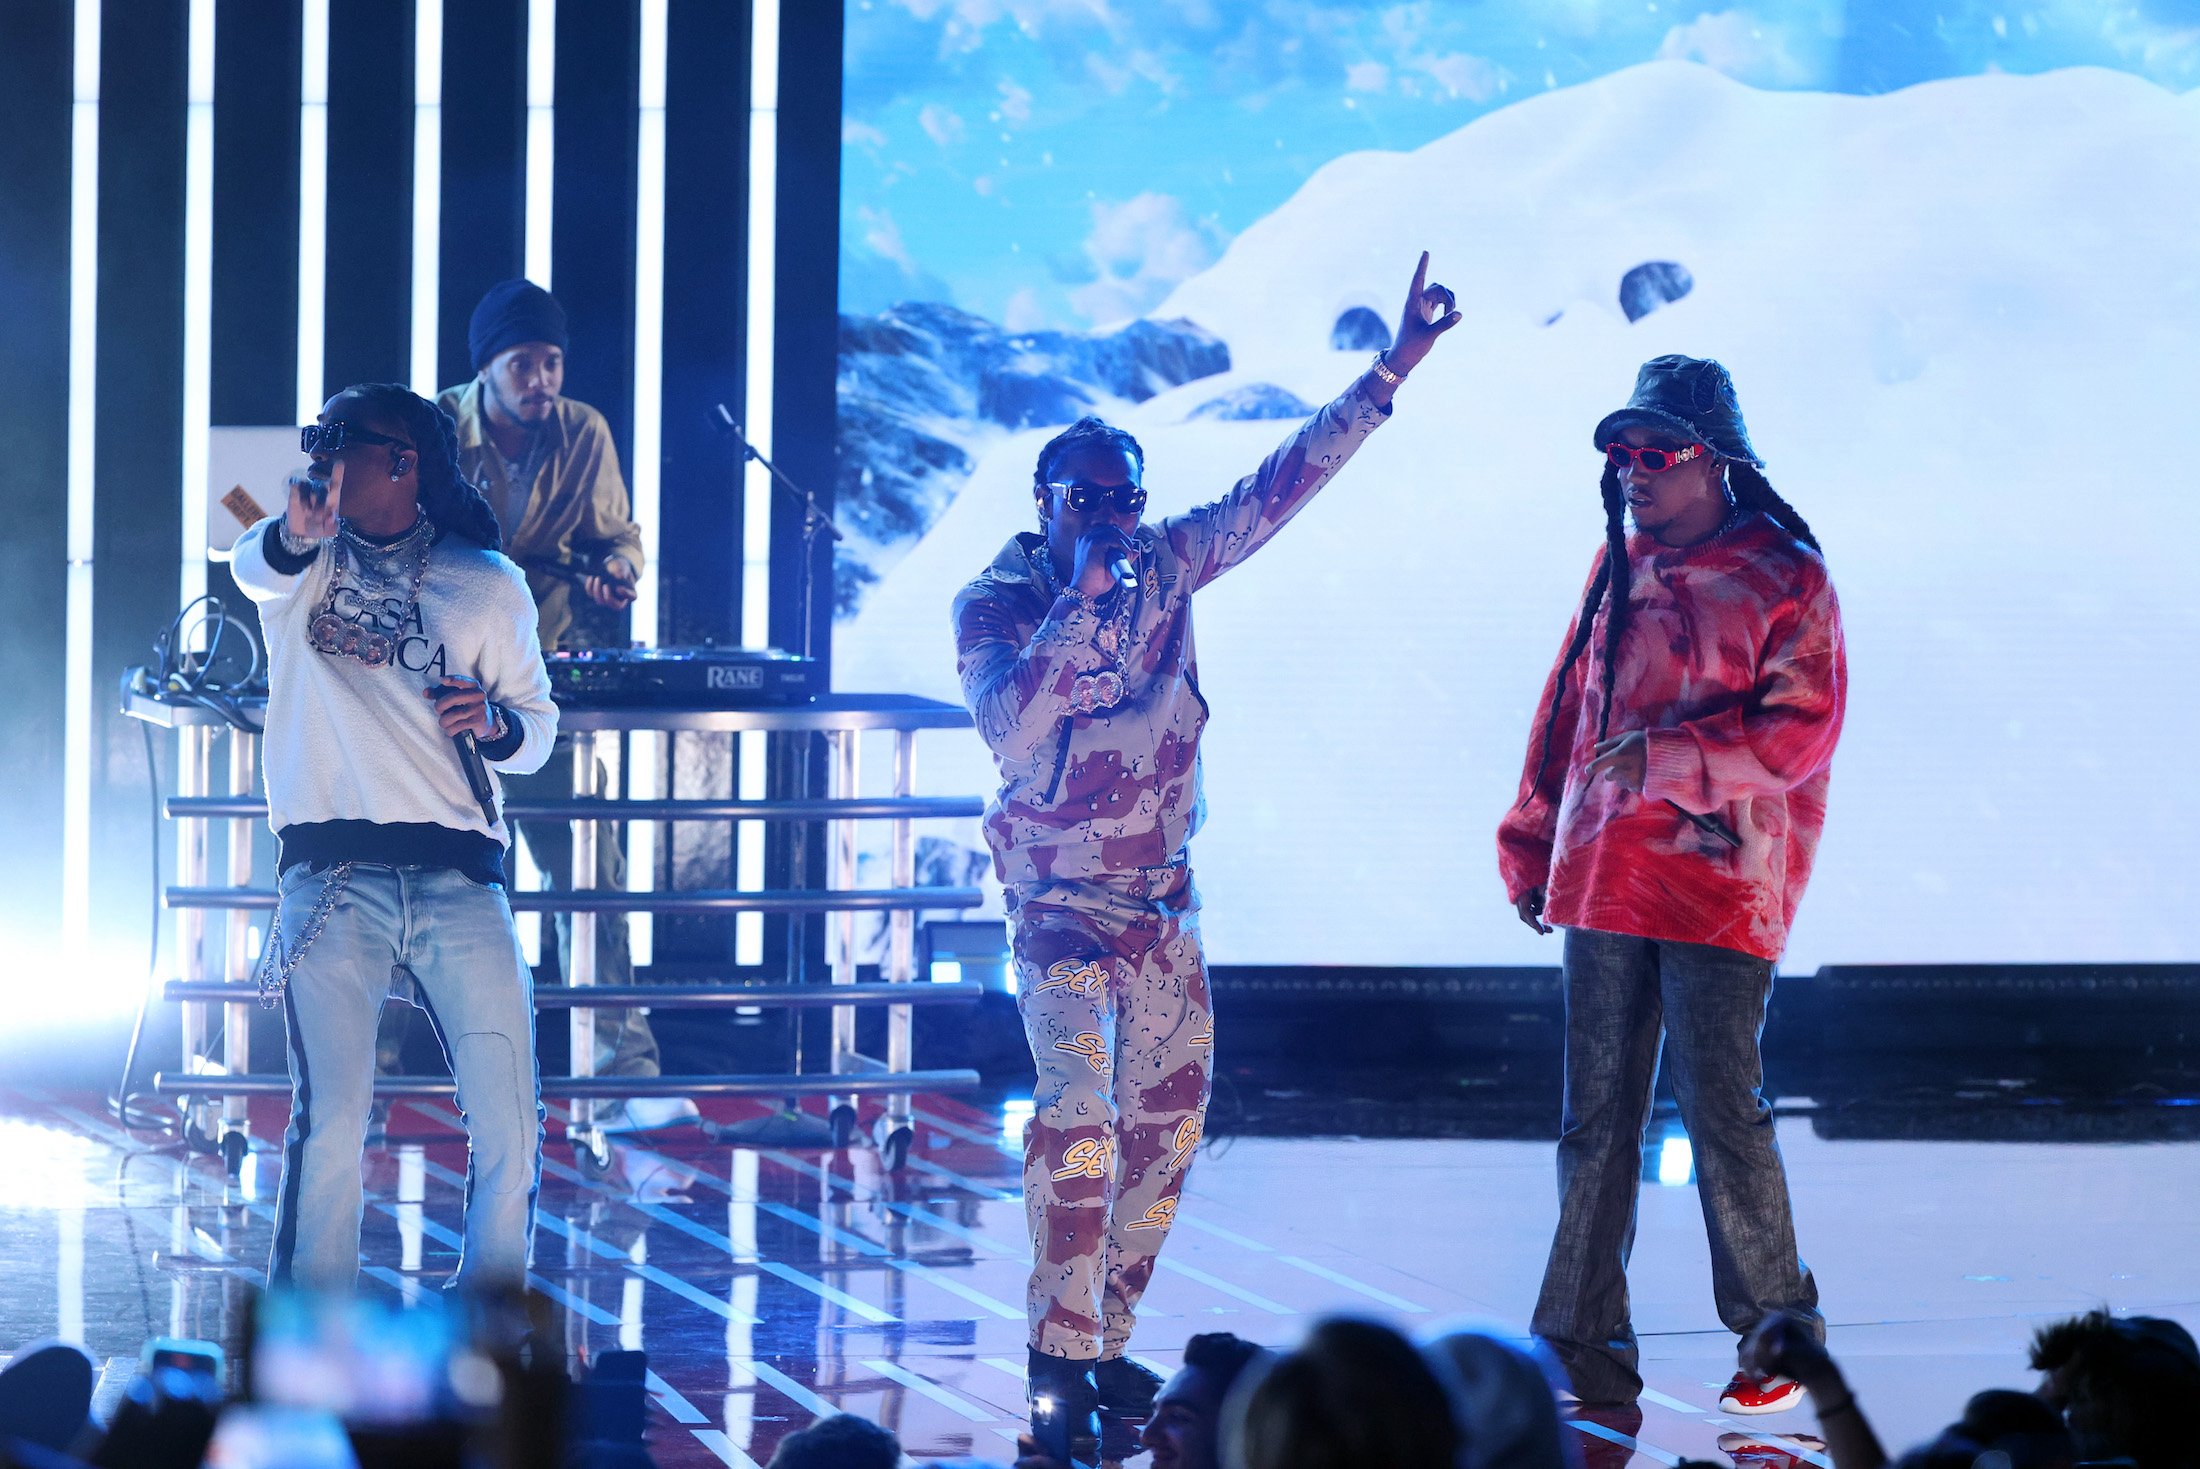 Quavo, Offset, and Takeoff of Migos perform onstage